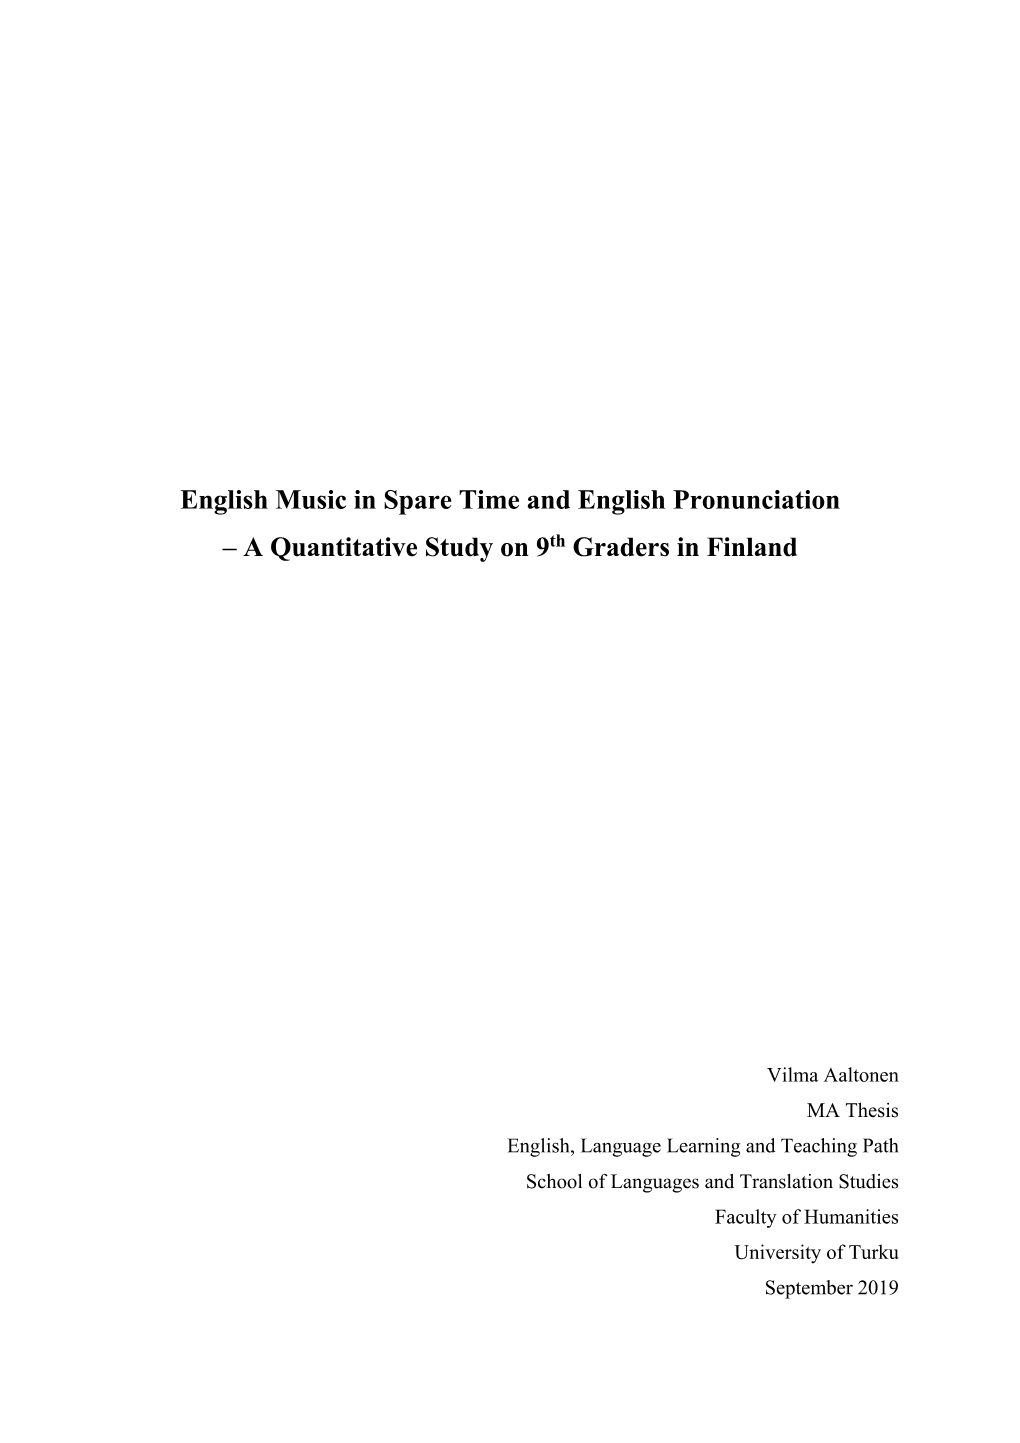 English Music in Spare Time and English Pronunciation – a Quantitative Study on 9Th Graders in Finland